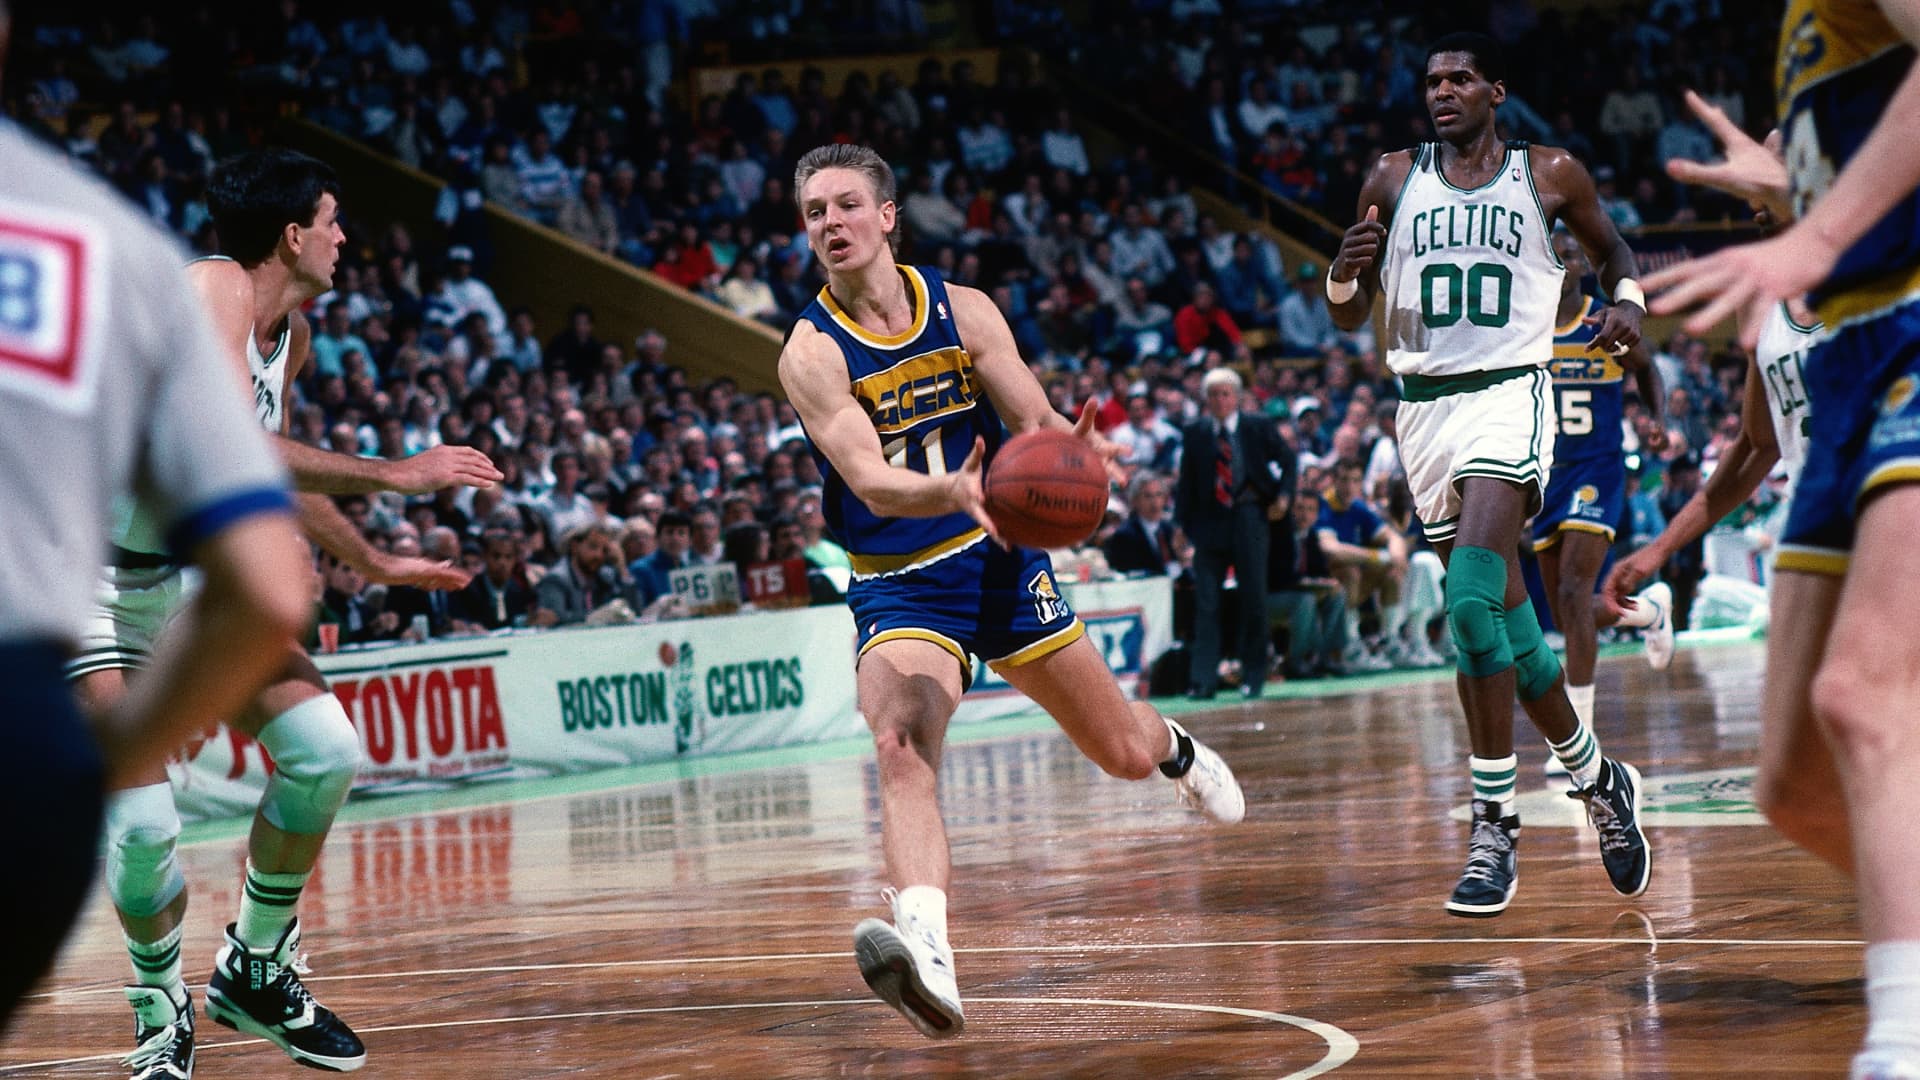 Detlef Schrempf #11 of the Indiana Pacers drives up court against the Boston Celtics during a game played in 1989 at the Boston Garden in Boston, Massachusetts.